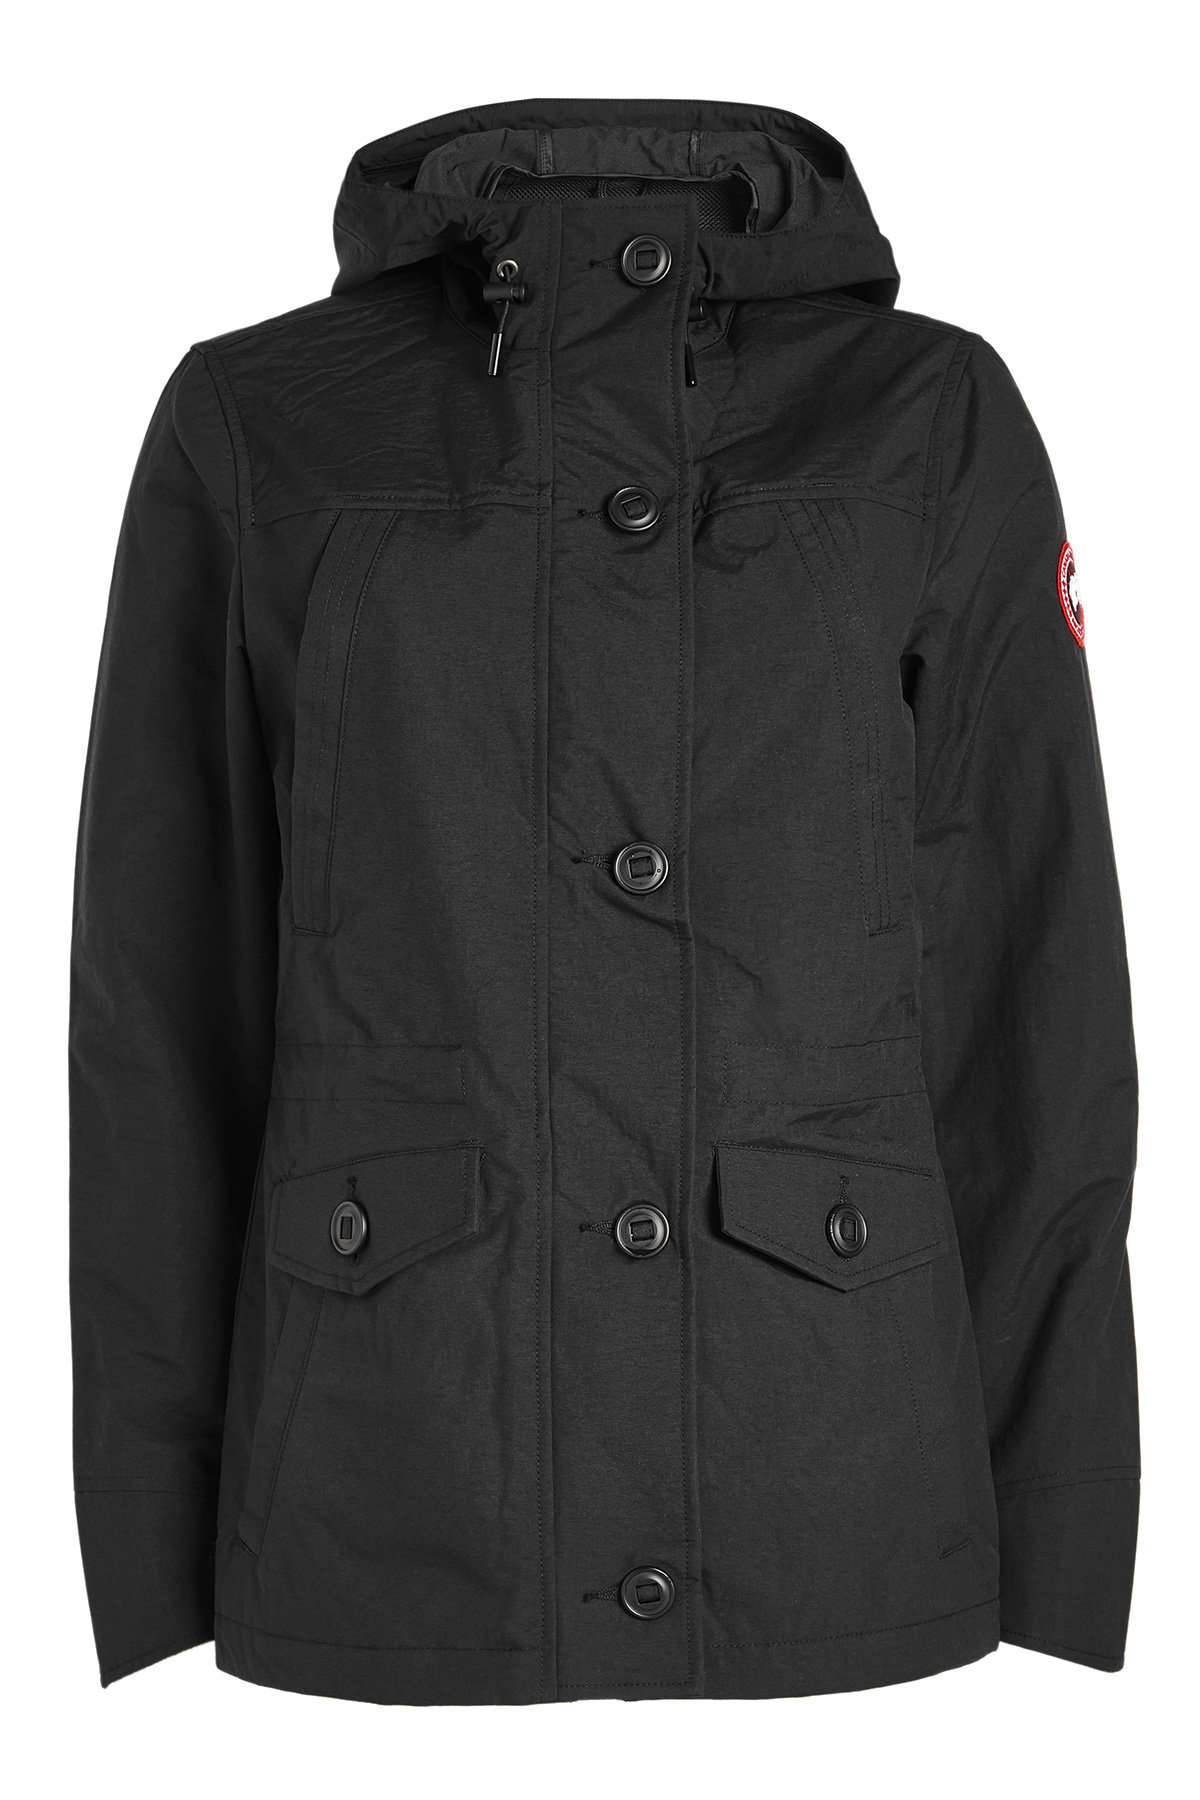 Reid Jacket with Hood by Canada Goose